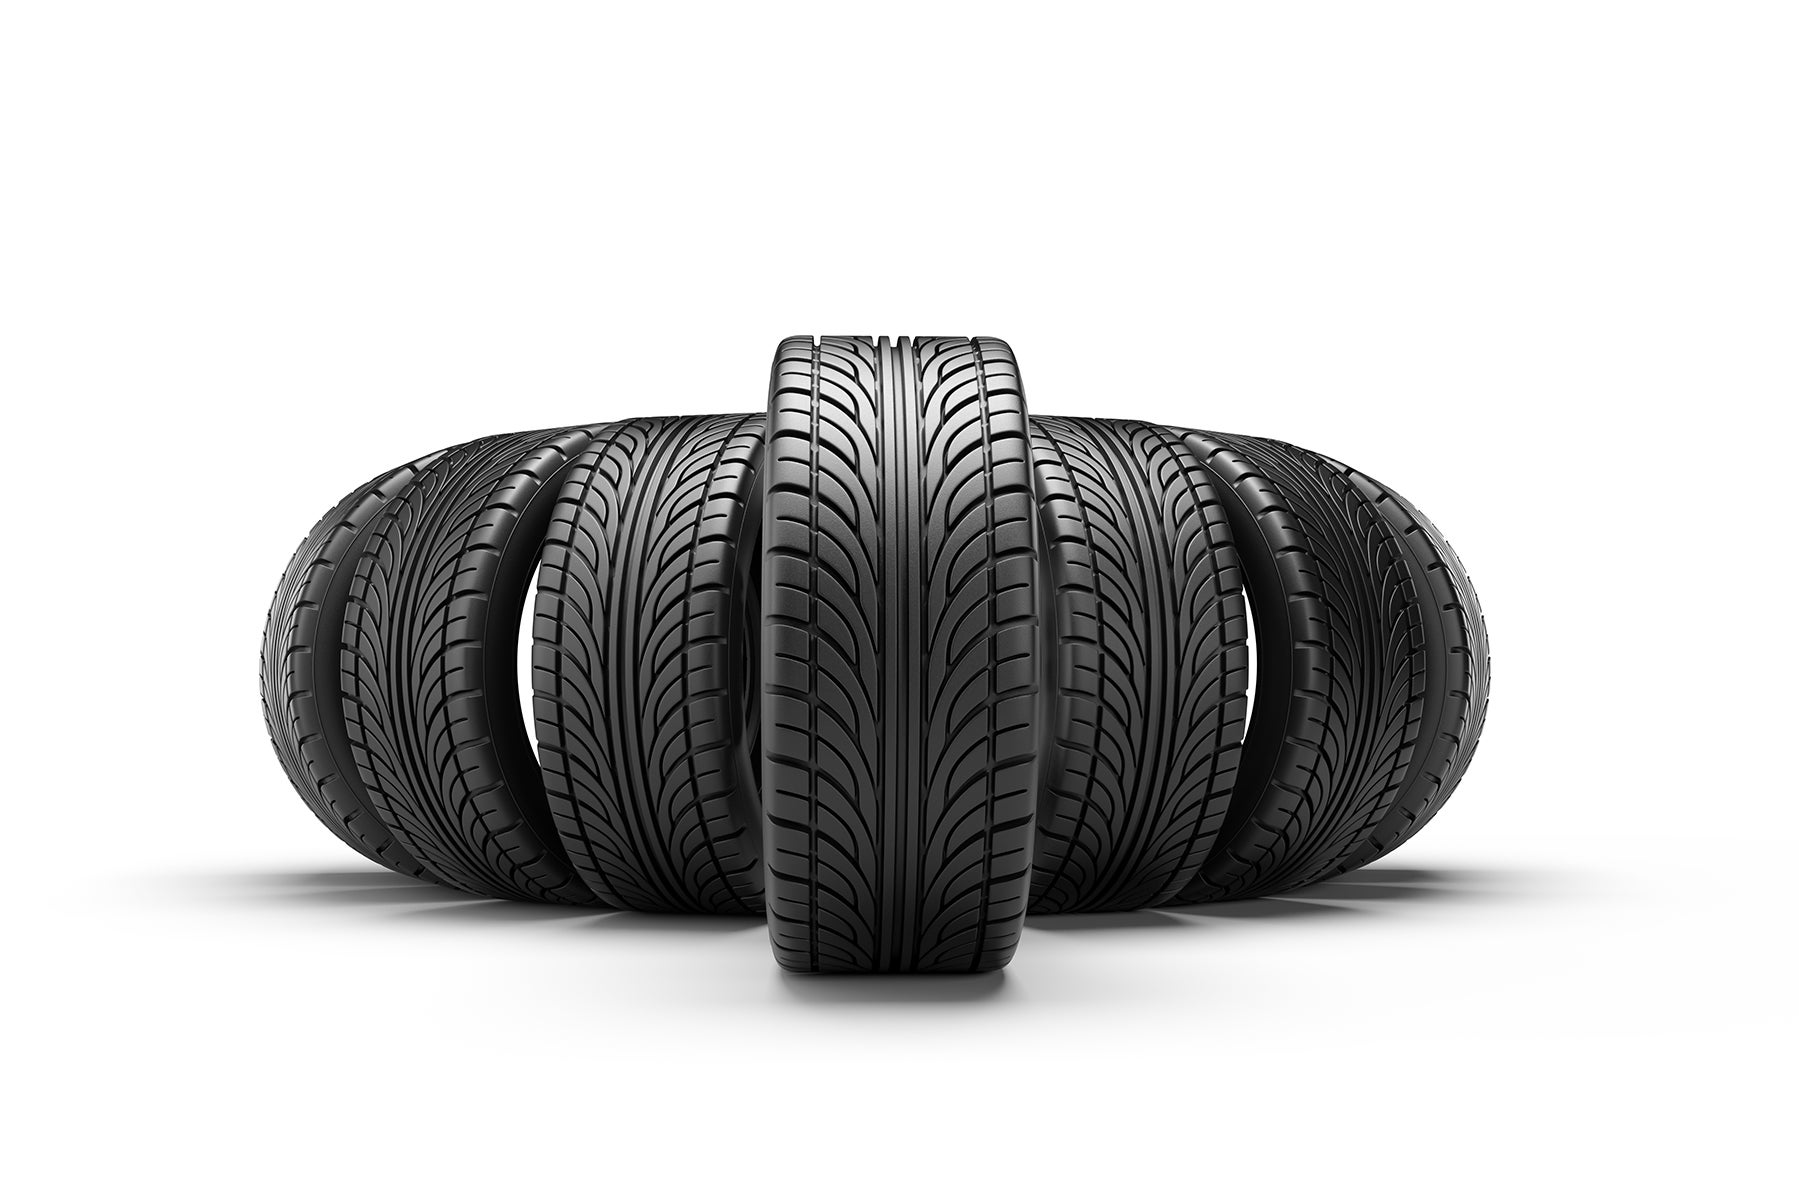 How to check your tires' health at Bennett Toyota of Allentown | 7 brand new tires